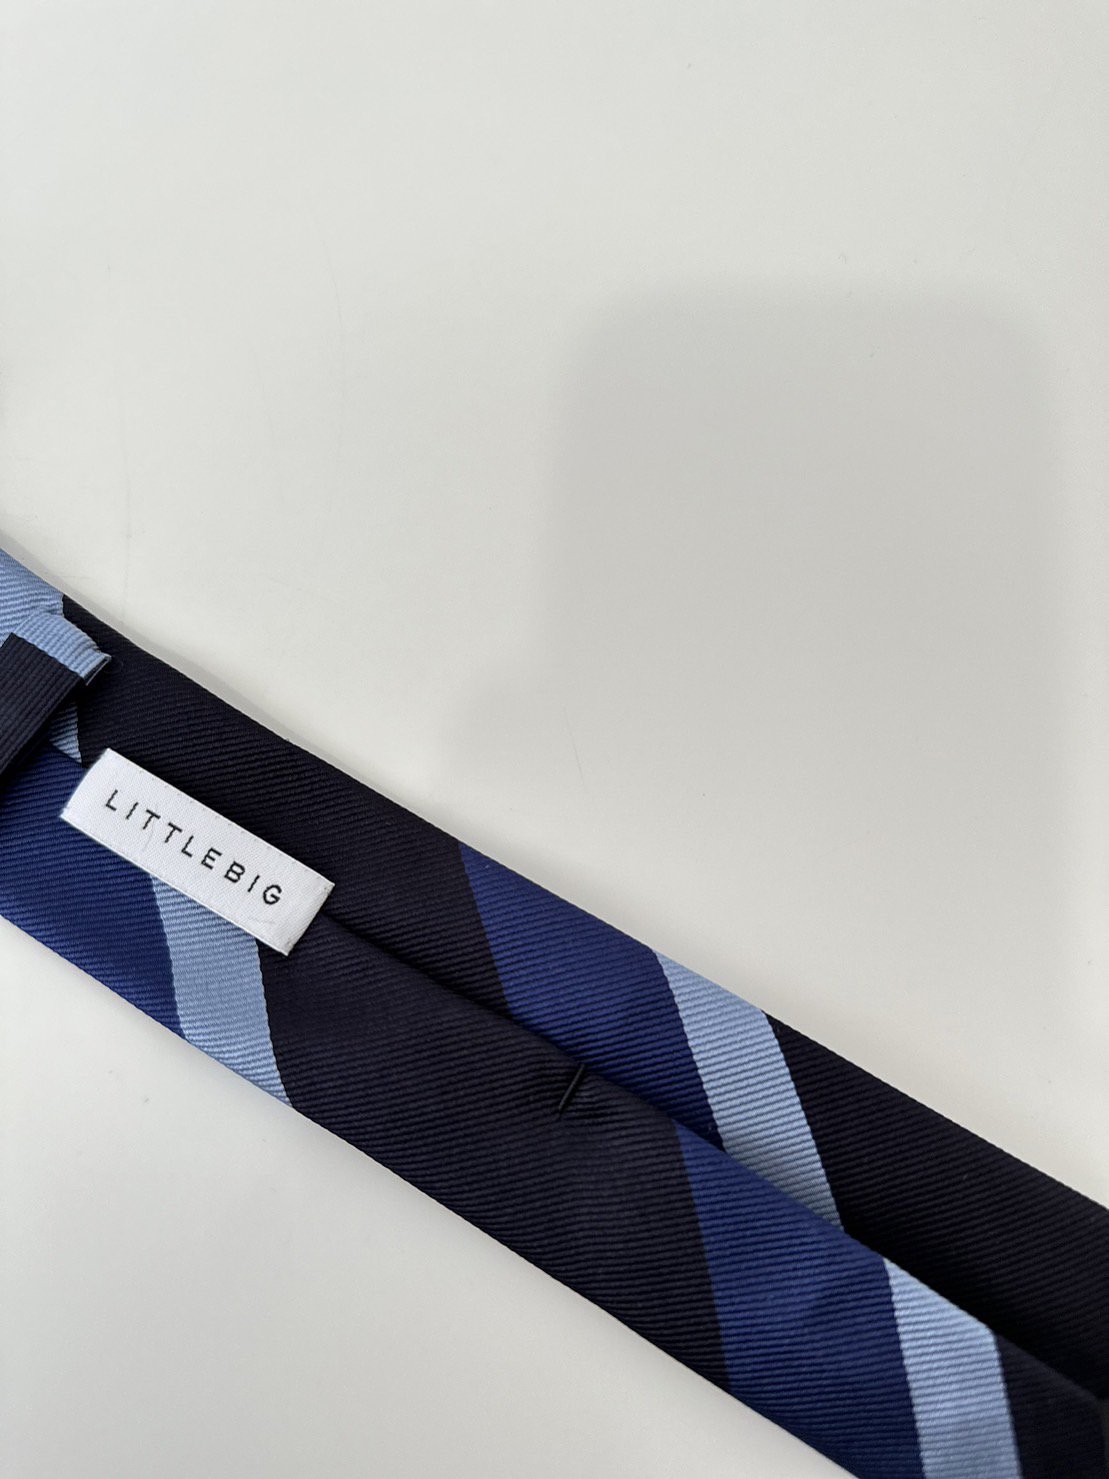 LITTLEBIG<br />Resimental Tie 2 / Navy<img class='new_mark_img2' src='https://img.shop-pro.jp/img/new/icons14.gif' style='border:none;display:inline;margin:0px;padding:0px;width:auto;' />